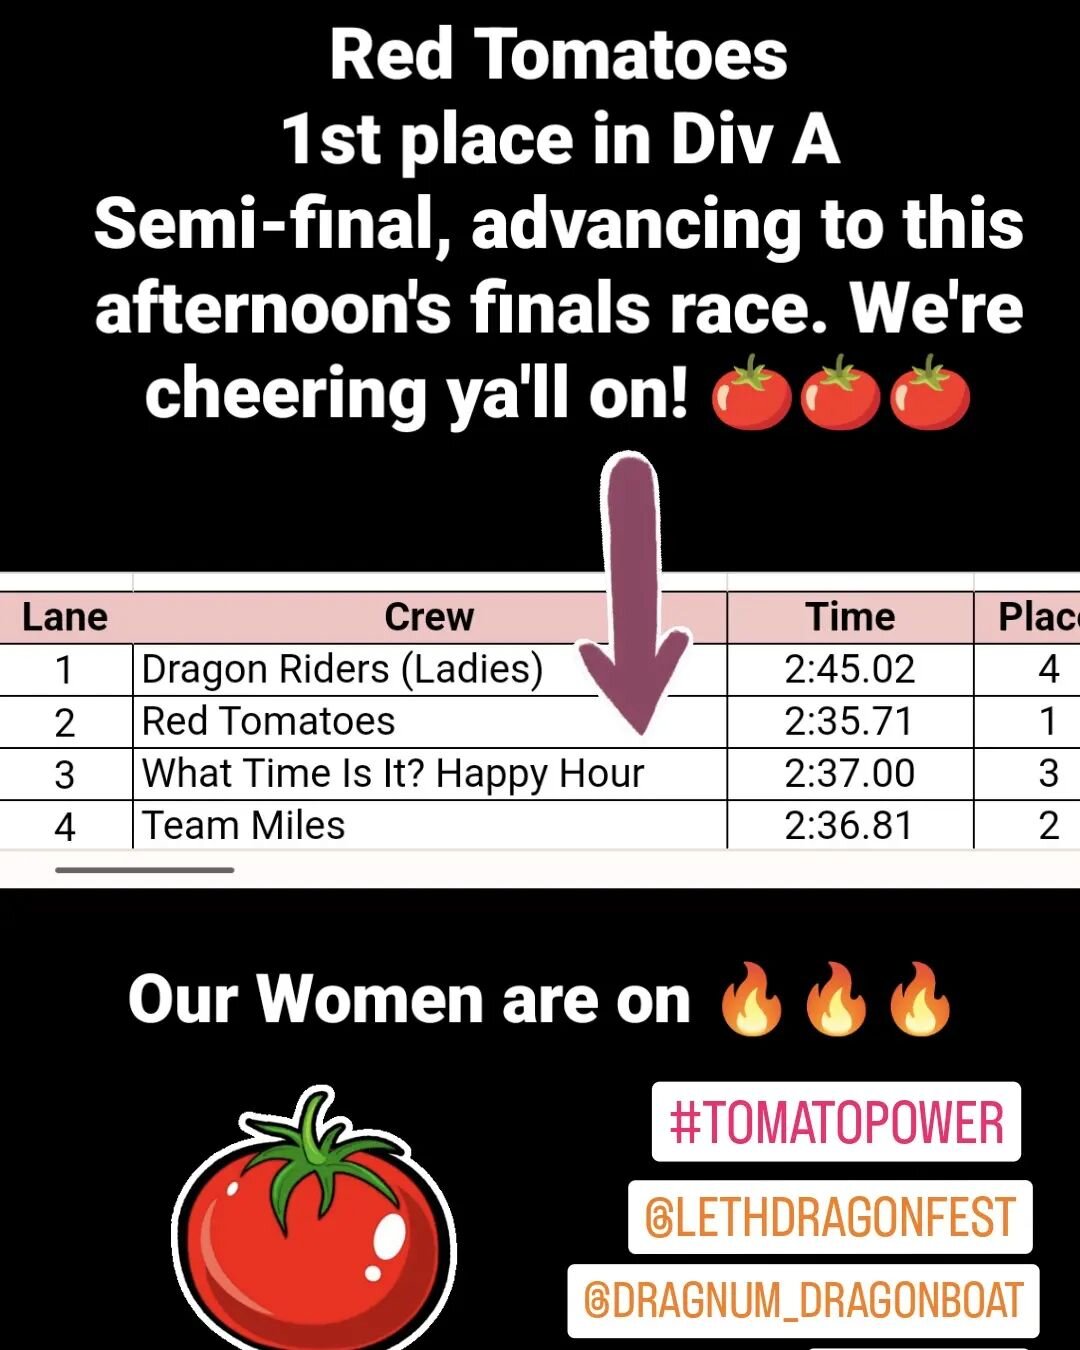 Red Tomatoes take 1st on the Women's Div A Semi-finals this morning, advancing to the Finals this afternoon. Come down to cheer them on! 🍅🍅🍅💪
.
.
#lethdragonfest22 #lethdragonfest ##redtomatoes #tomatopower #strongwomen #redeyesdragonboat #dragnu